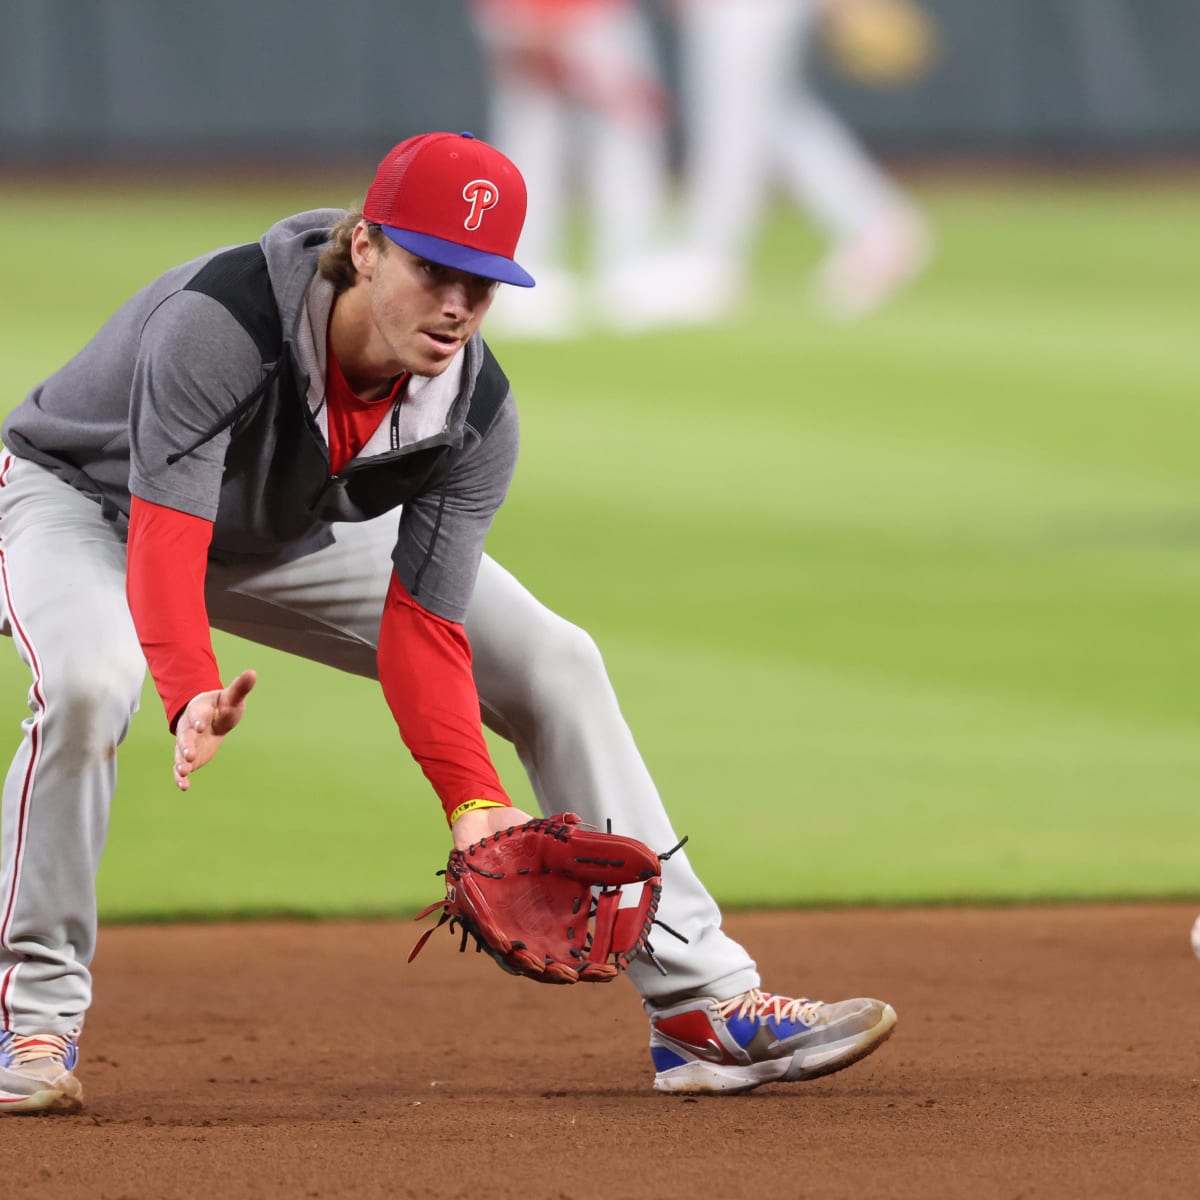 Phillies news and rumors 6/17: Bryson Stott is once again on a hot streak   Phillies Nation - Your source for Philadelphia Phillies news, opinion,  history, rumors, events, and other fun stuff.